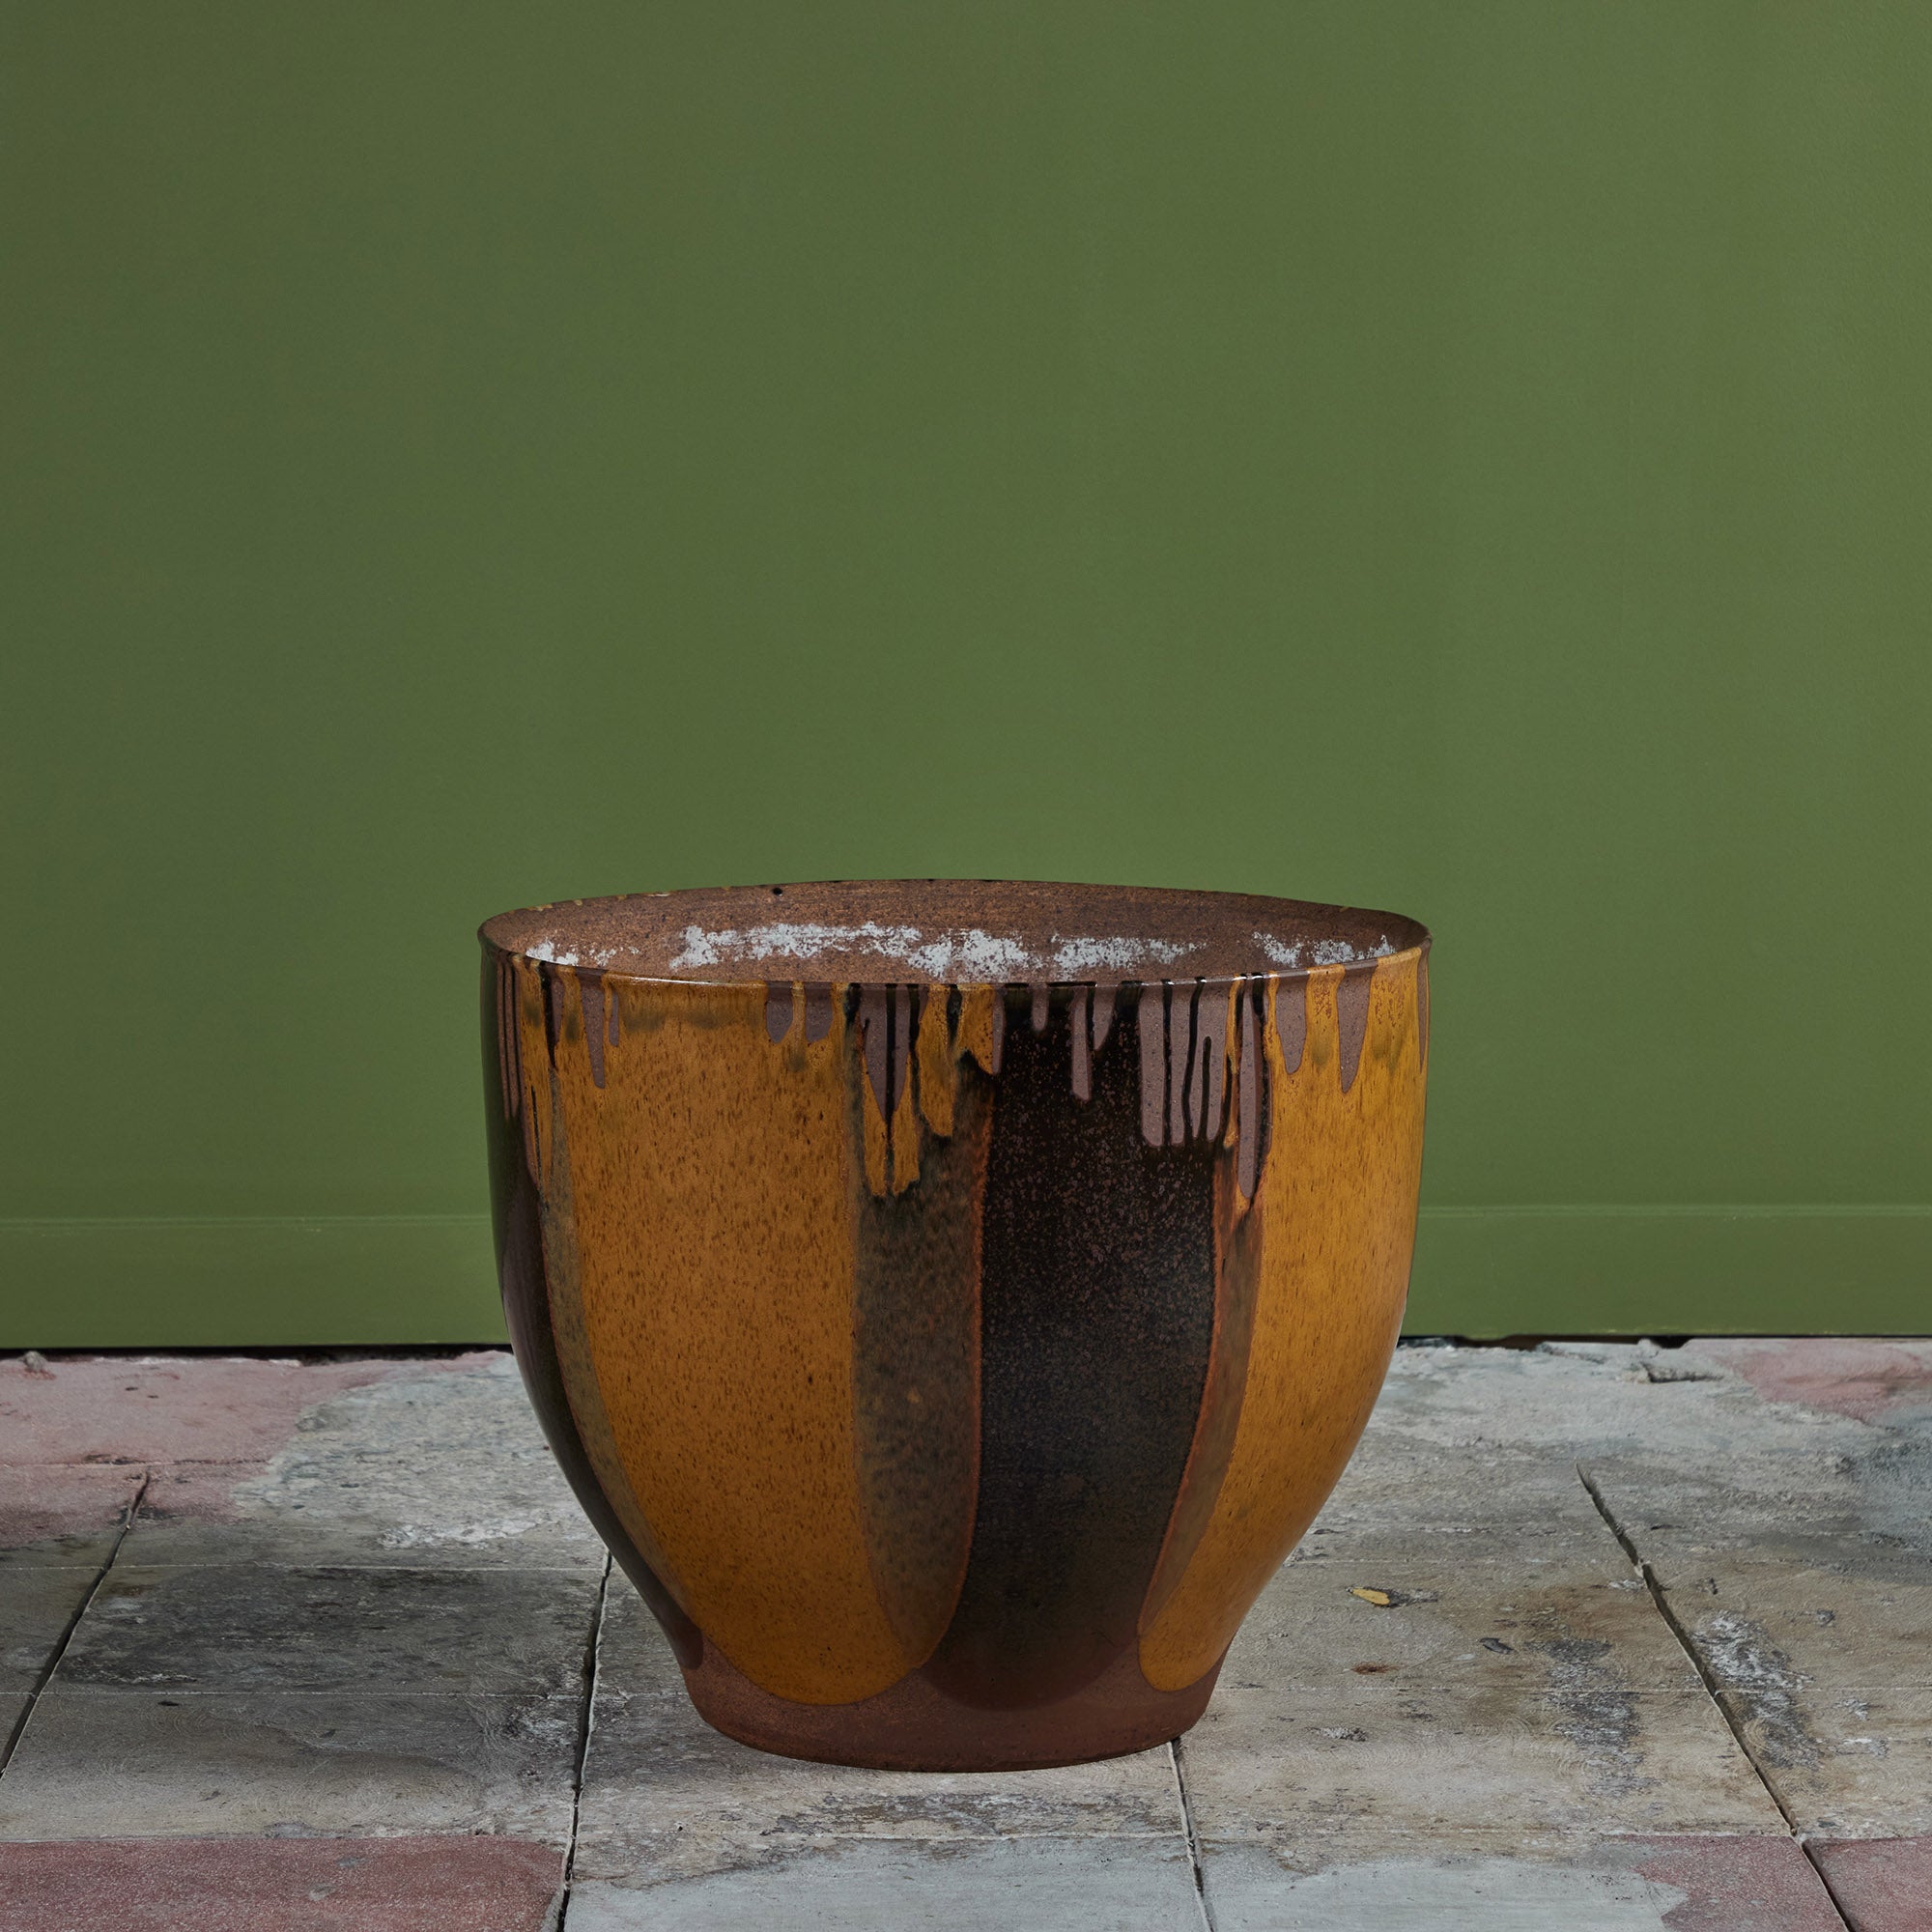 David Cressey Flame-Glaze Planter for Architectural Pottery